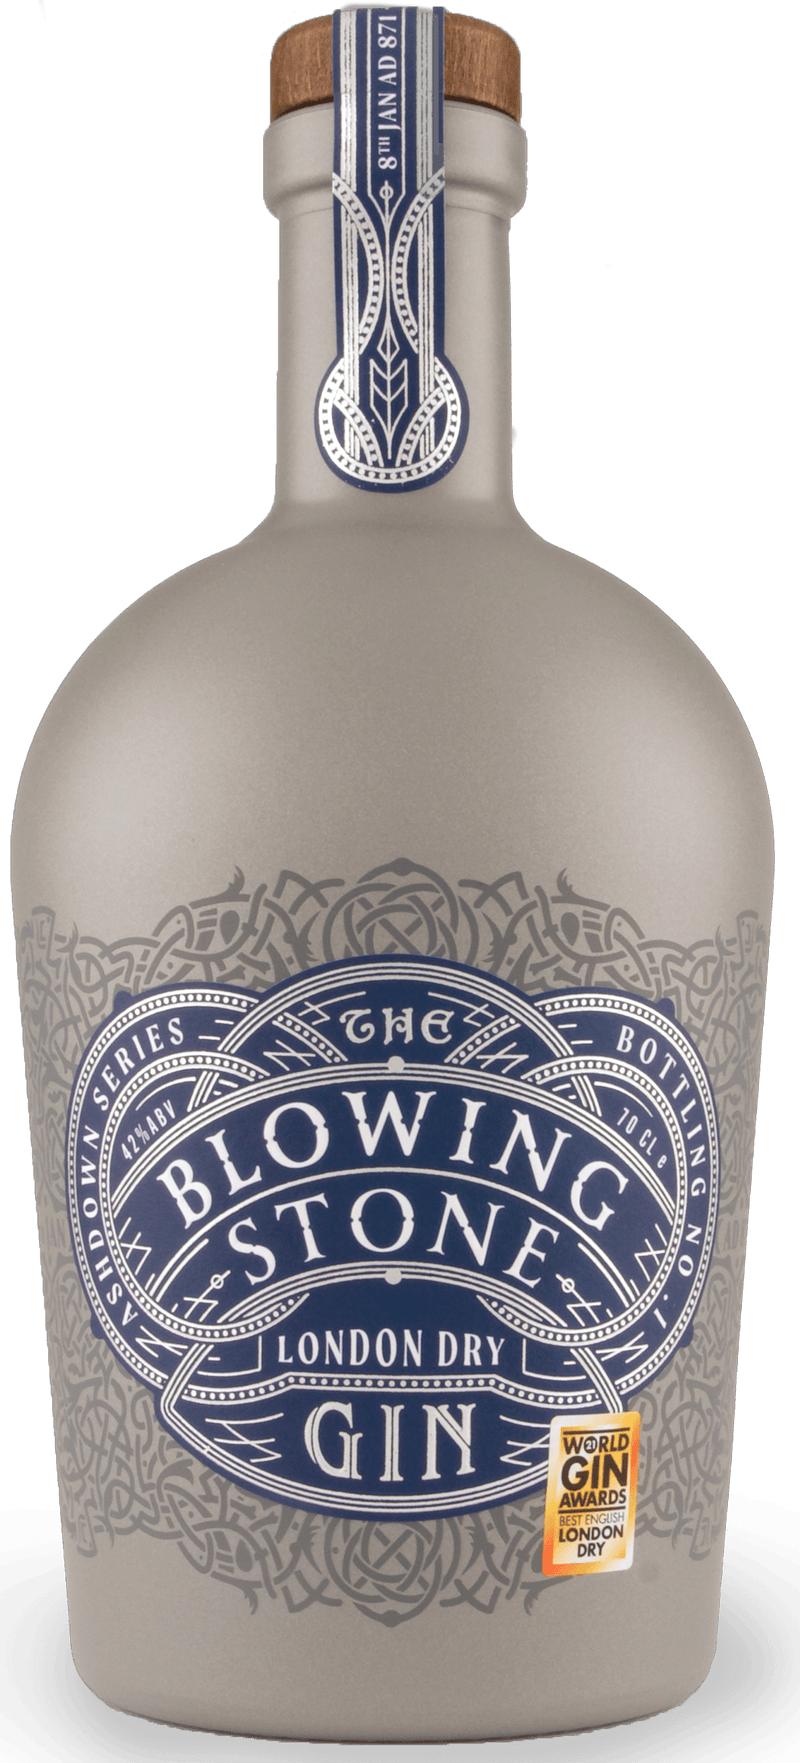 The Blowing Stone London Dry Gin 70cl